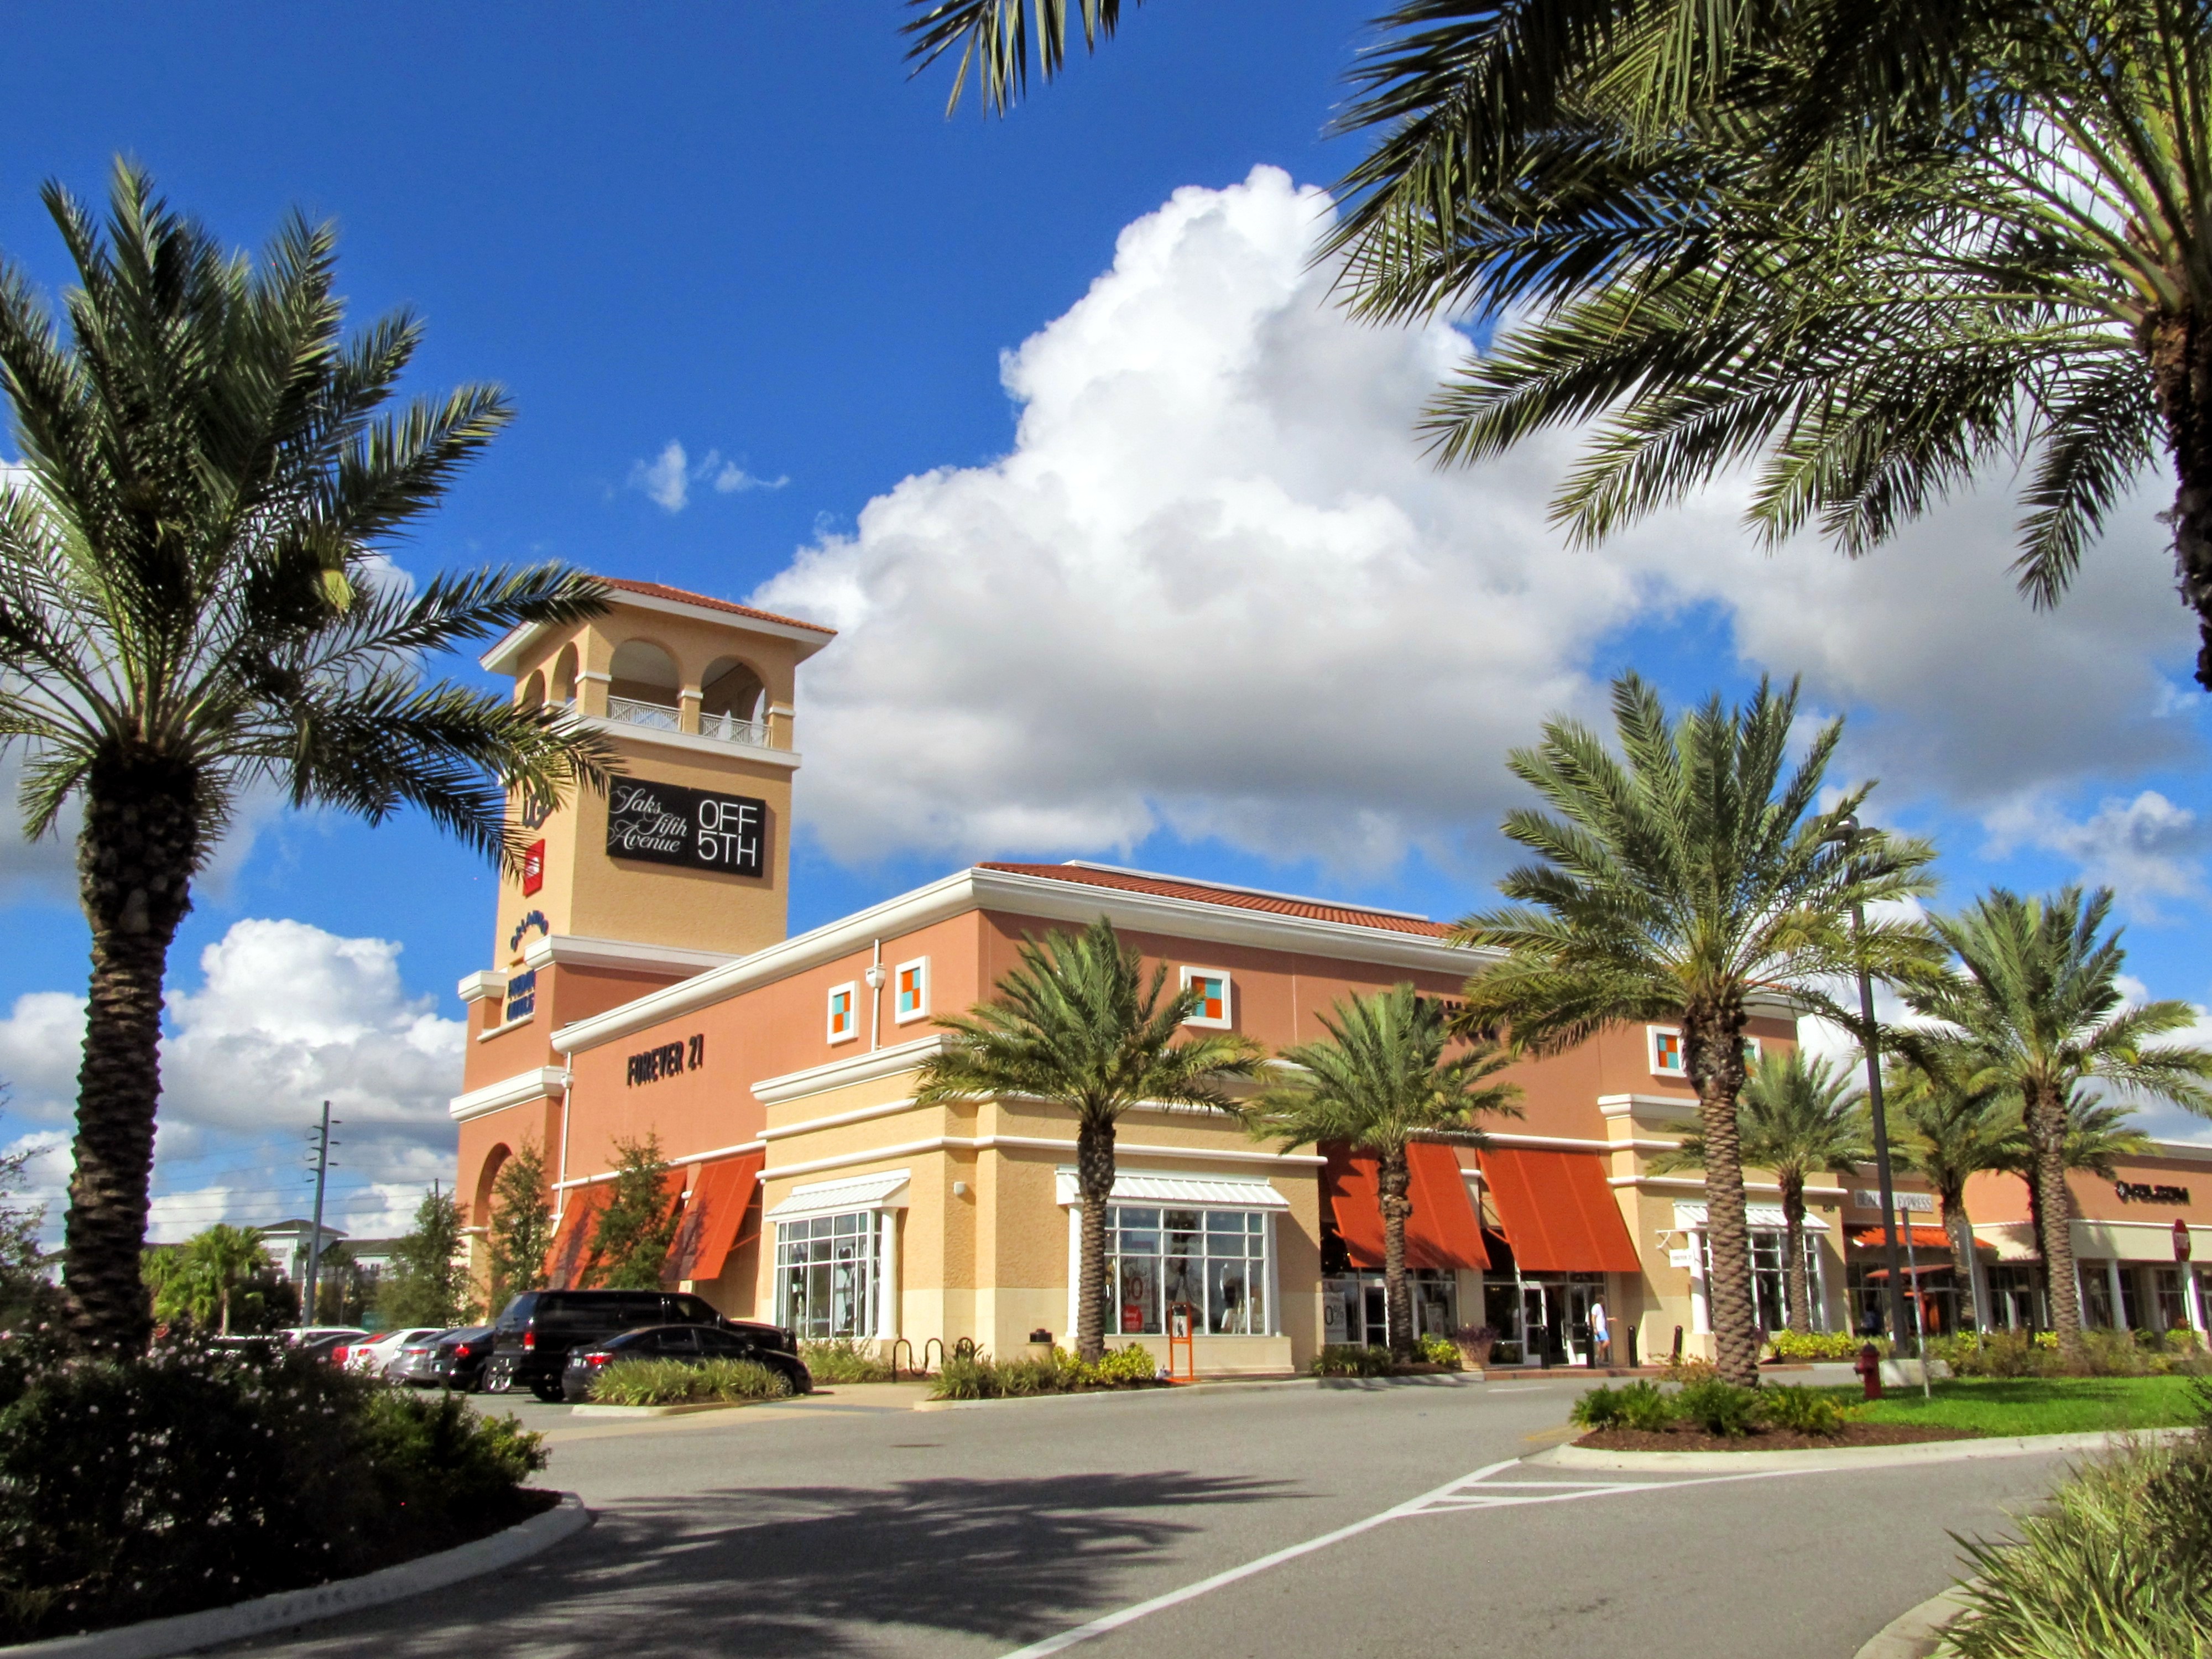 File:Orlando Premium Outlets 03.JPG - Wikimedia Commons